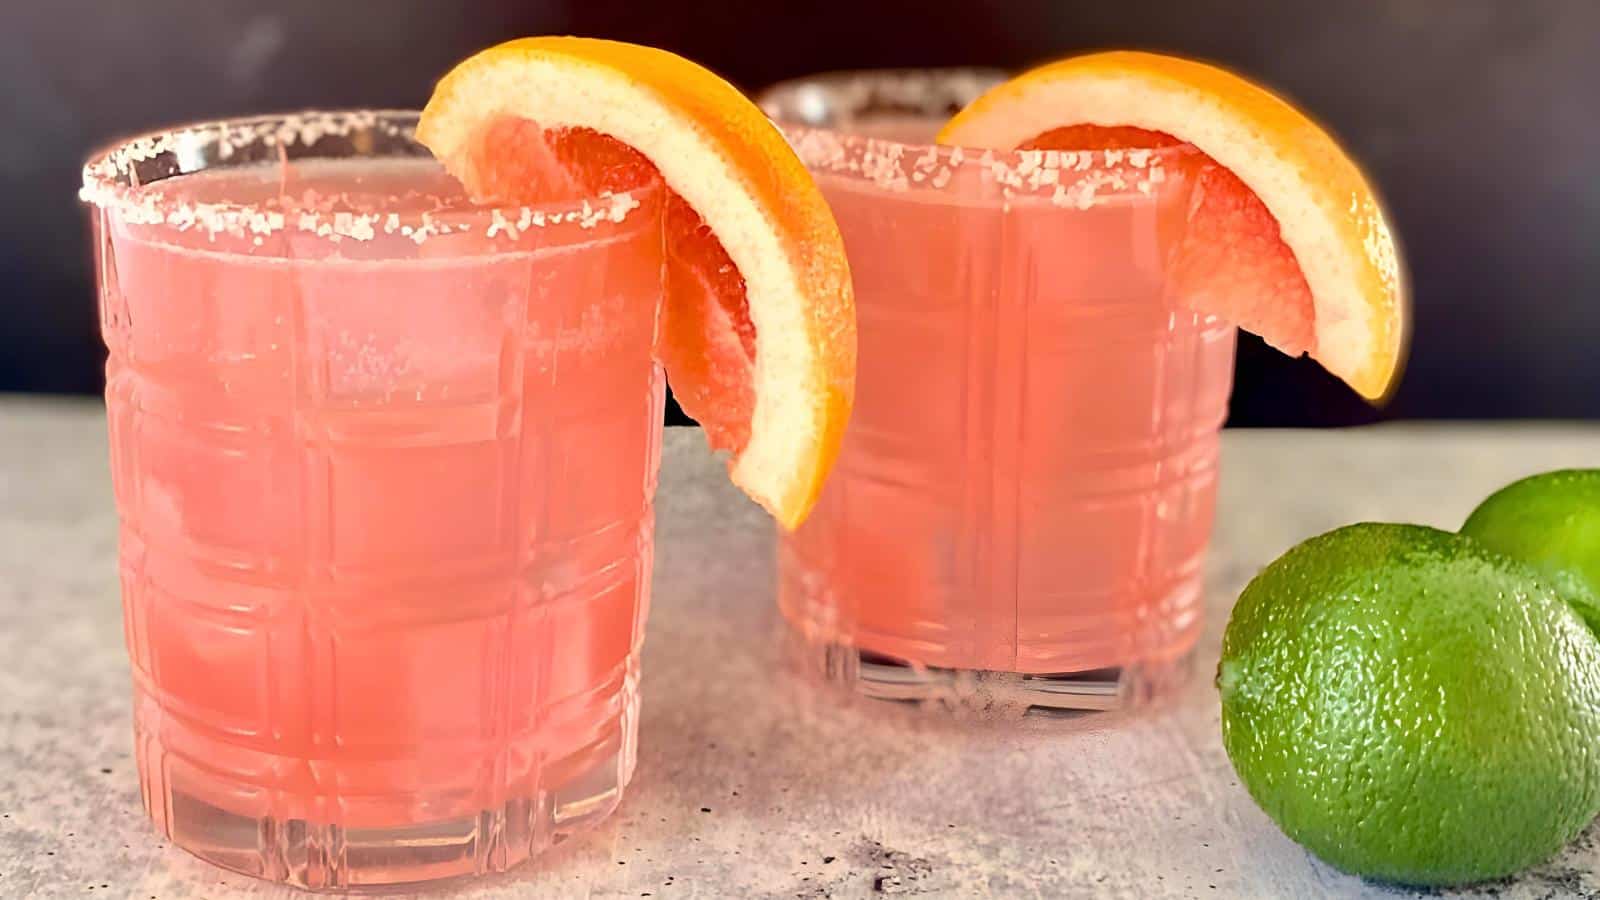 <p>The Paloma is a classic Mexican cocktail that’s perfect for summer. Tequila, grapefruit soda, and a splash of lime make this drink refreshing and light. Serve it over ice with a salted rim for a perfect summer finish.<br><strong>Get the Recipe: </strong><a href="https://theartoffoodandwine.com/paloma-cocktail/?utm_source=msn&utm_medium=page&utm_campaign=msn" rel="noopener">Paloma Cocktail</a></p>